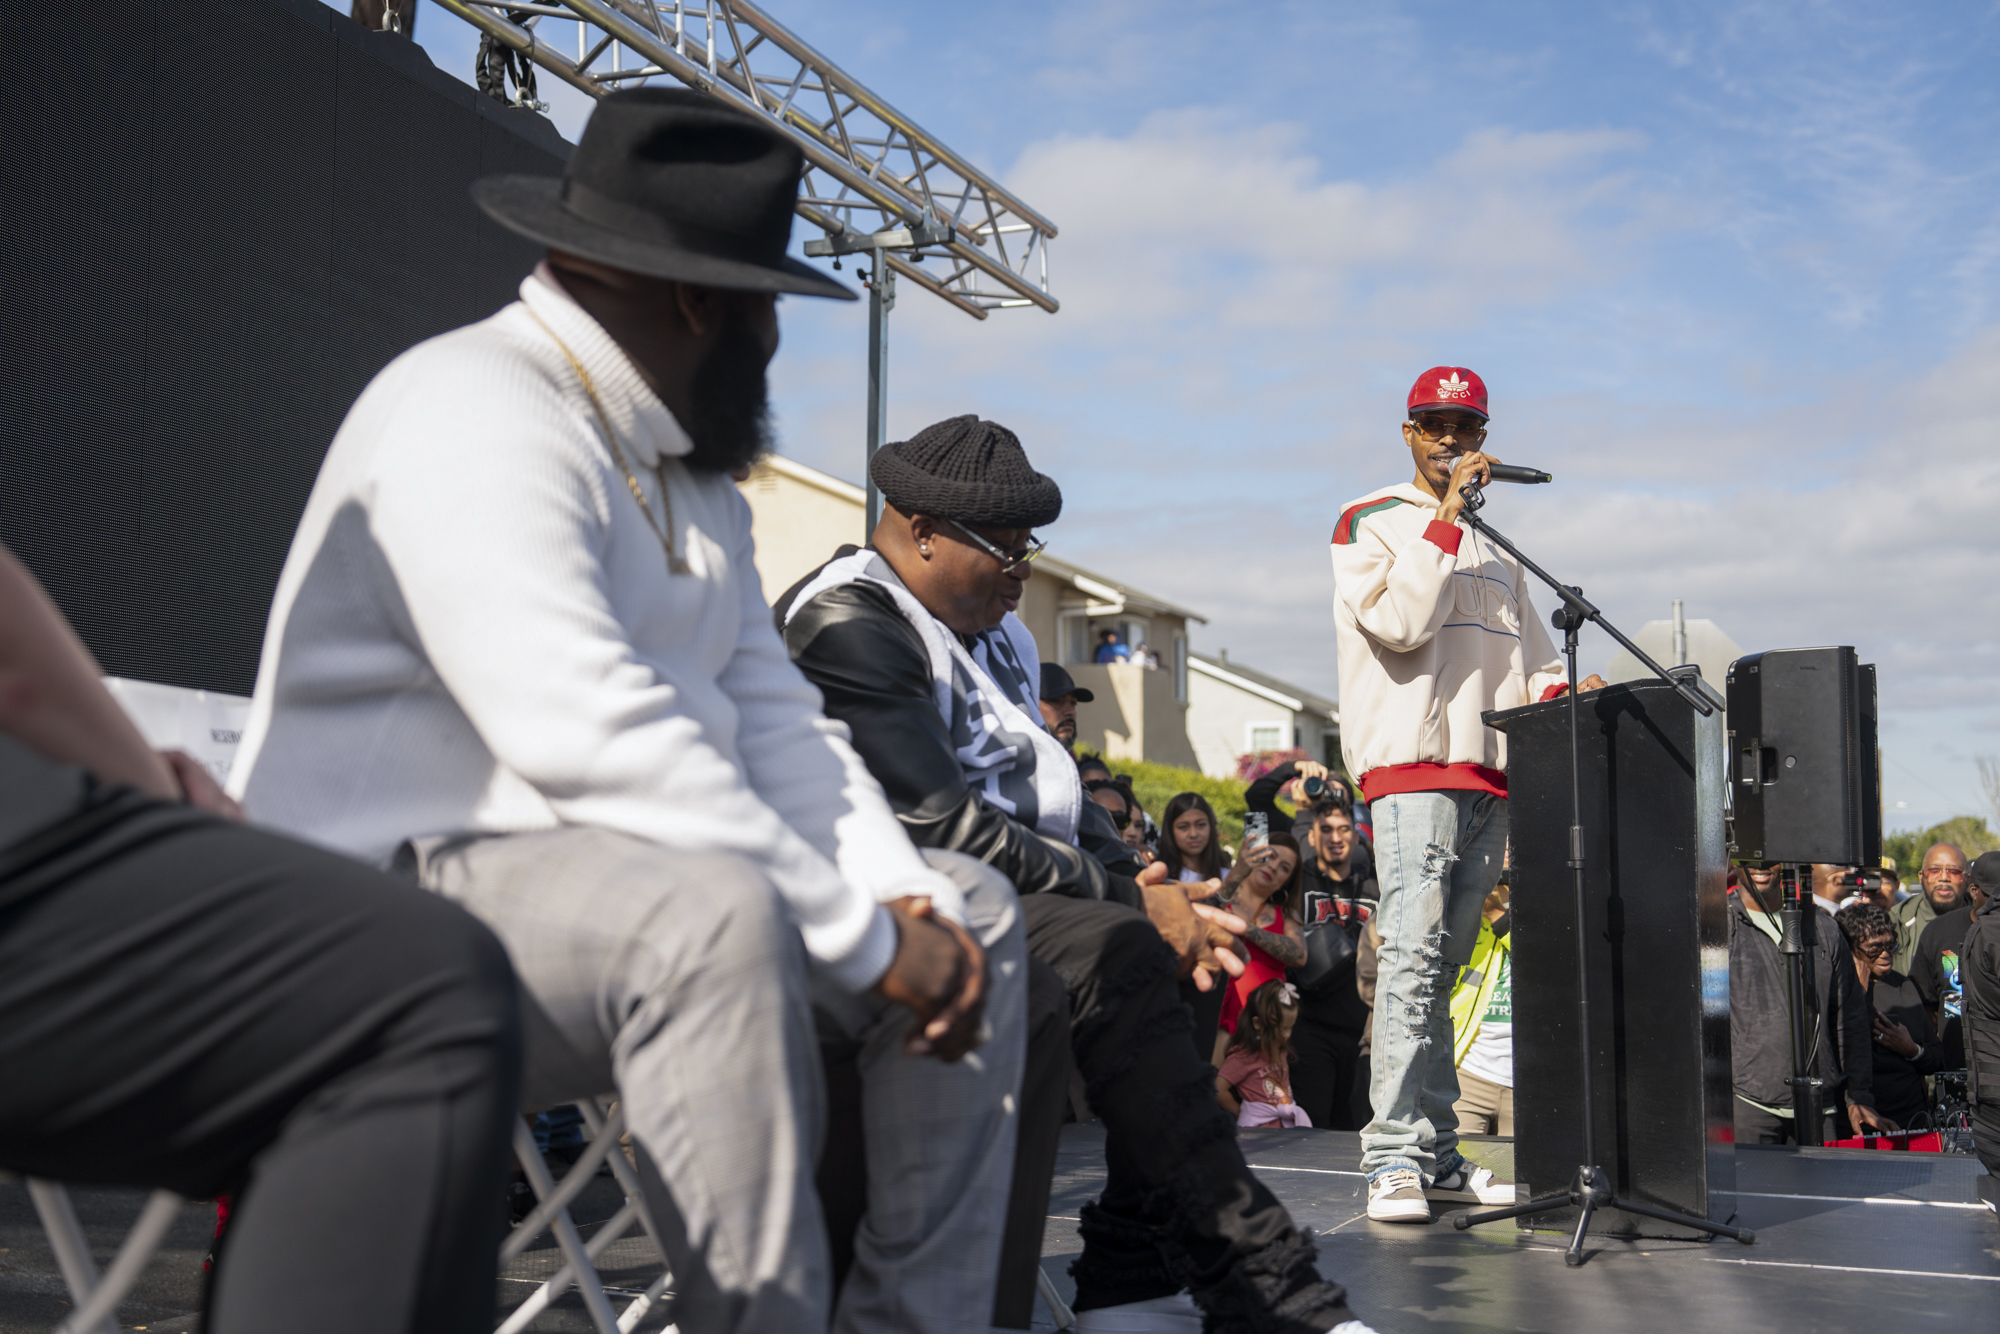 Earl “E-40” Stevens’s son, Earl Stevens Jr. talks about his father’s legacy during the honorary ceremony on Oct. 21, 2023 in Vallejo, Calif.